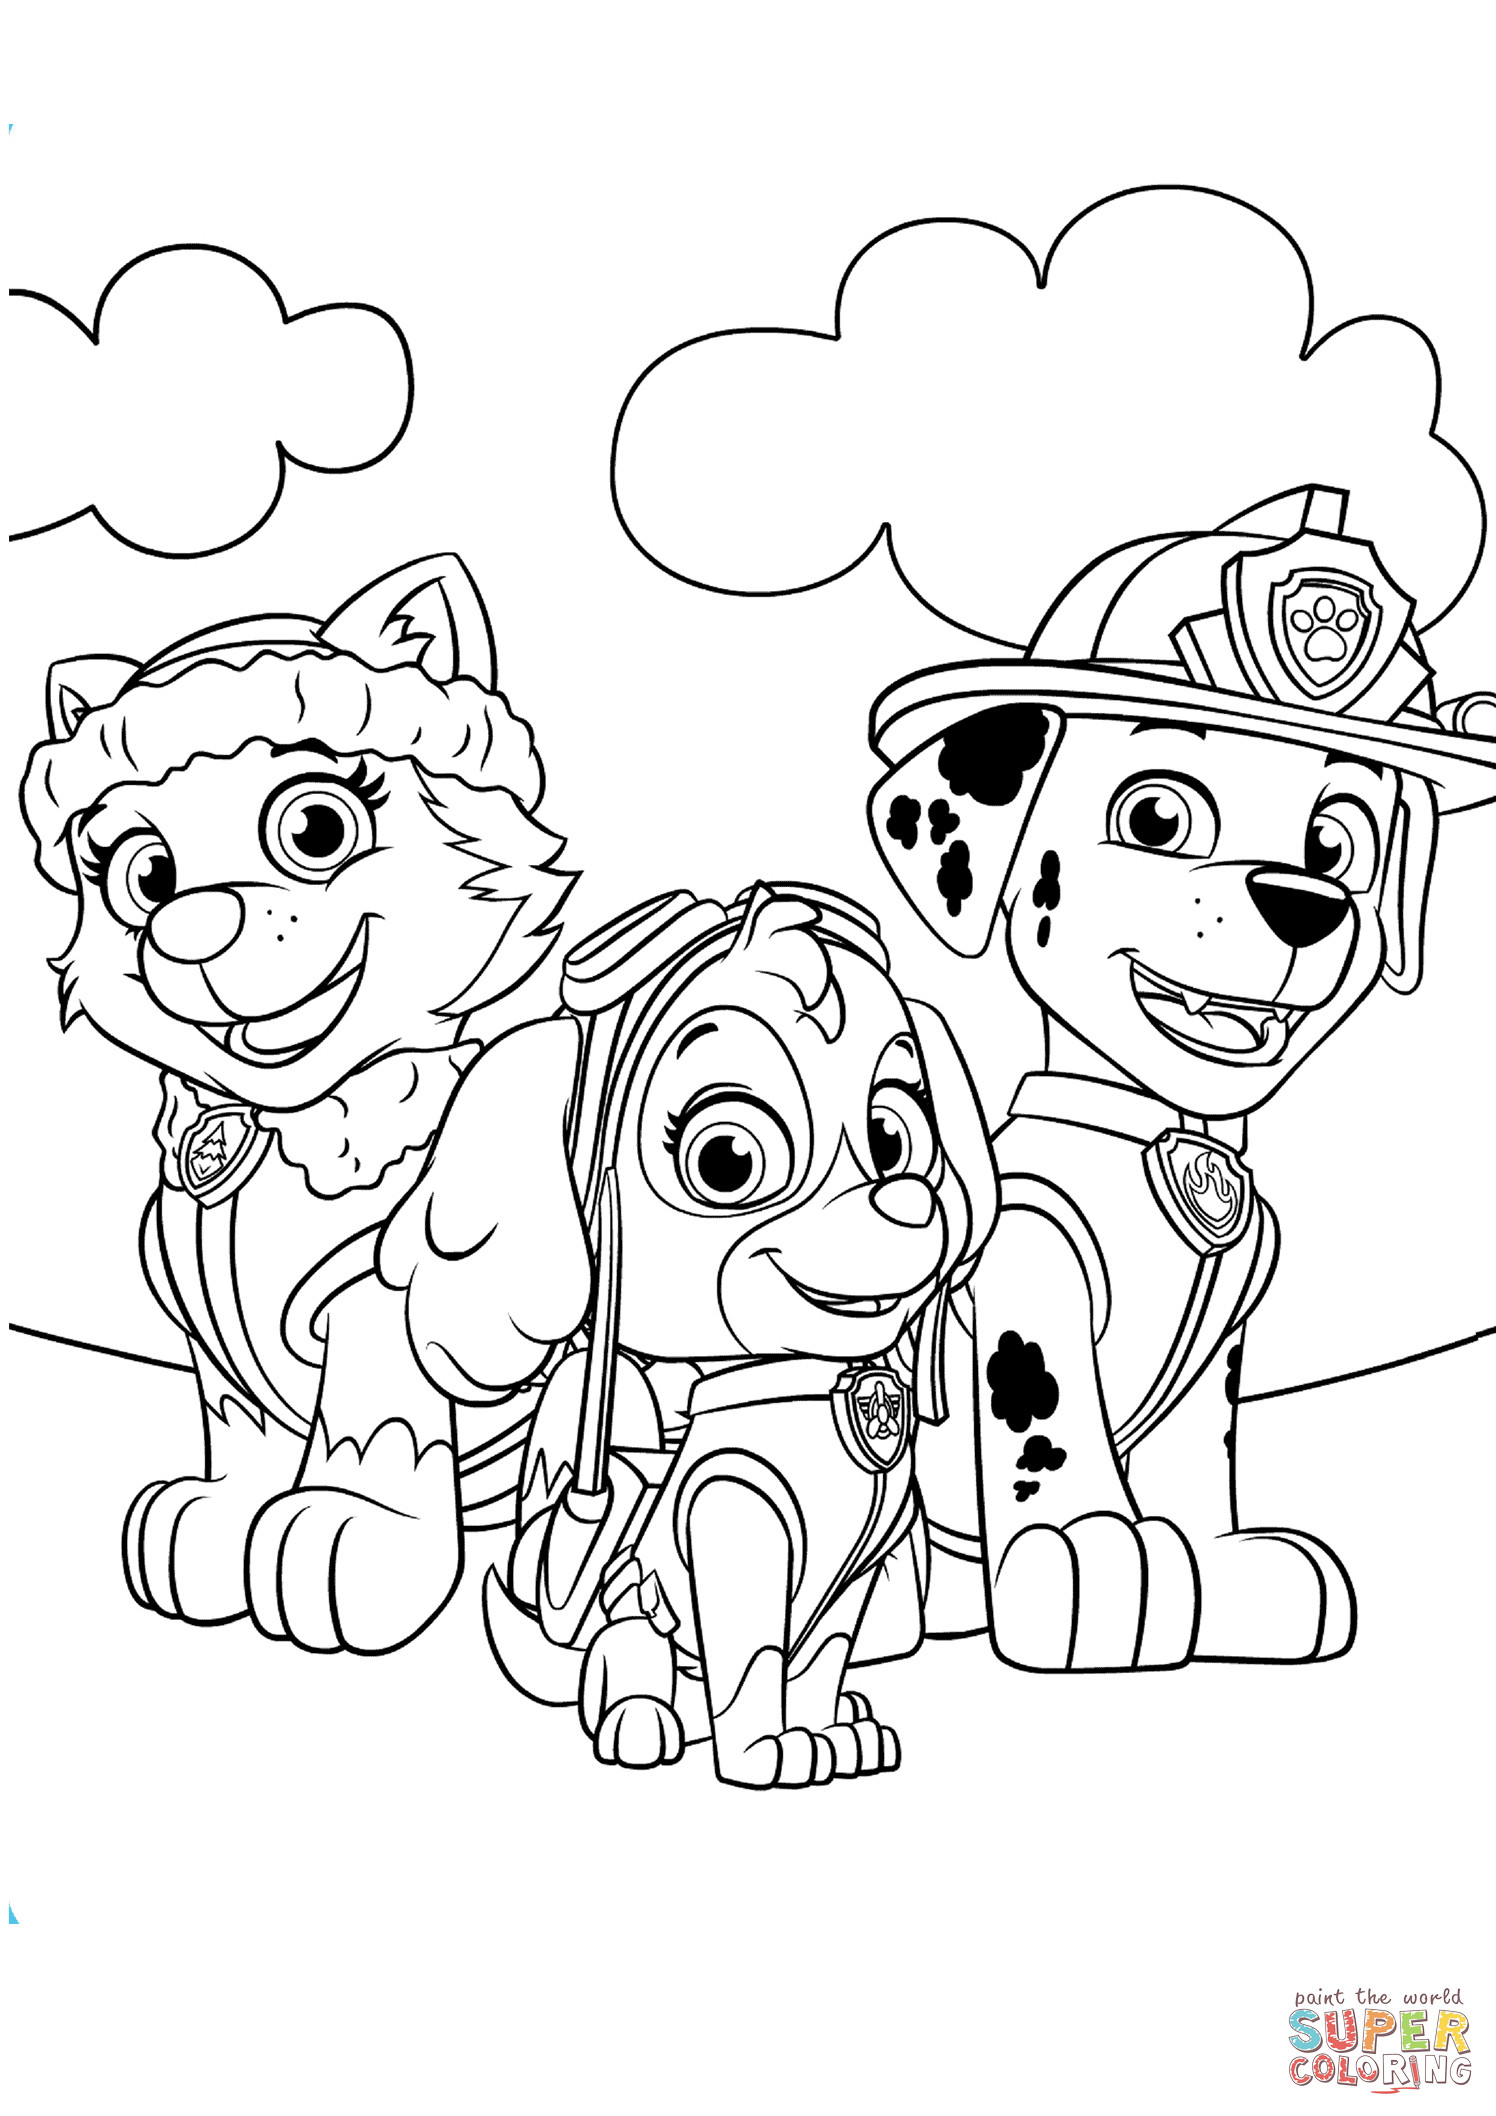 Paw Patrol Coloring Pages Everest
 Everest Marshall and Skye coloring page